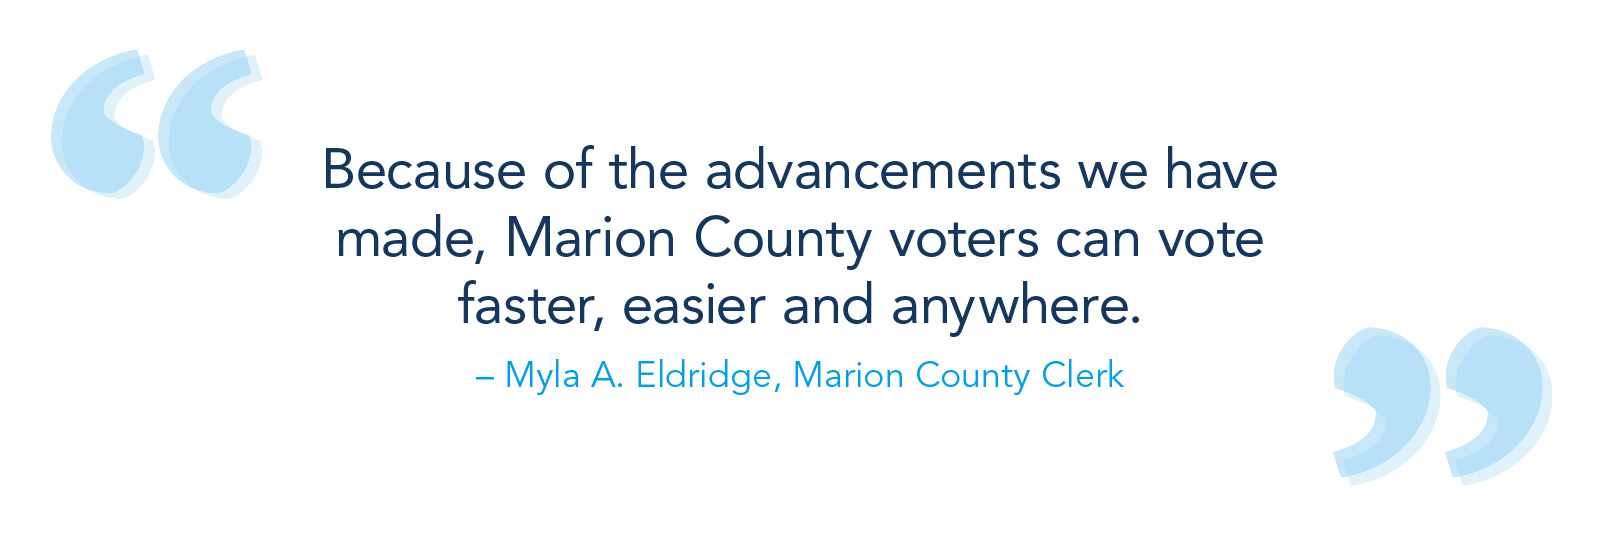 Because of the advancements we have made, Marion County voters can vote faster, easier and anywhere. – Myla A. Eldridge, Marion County clerk